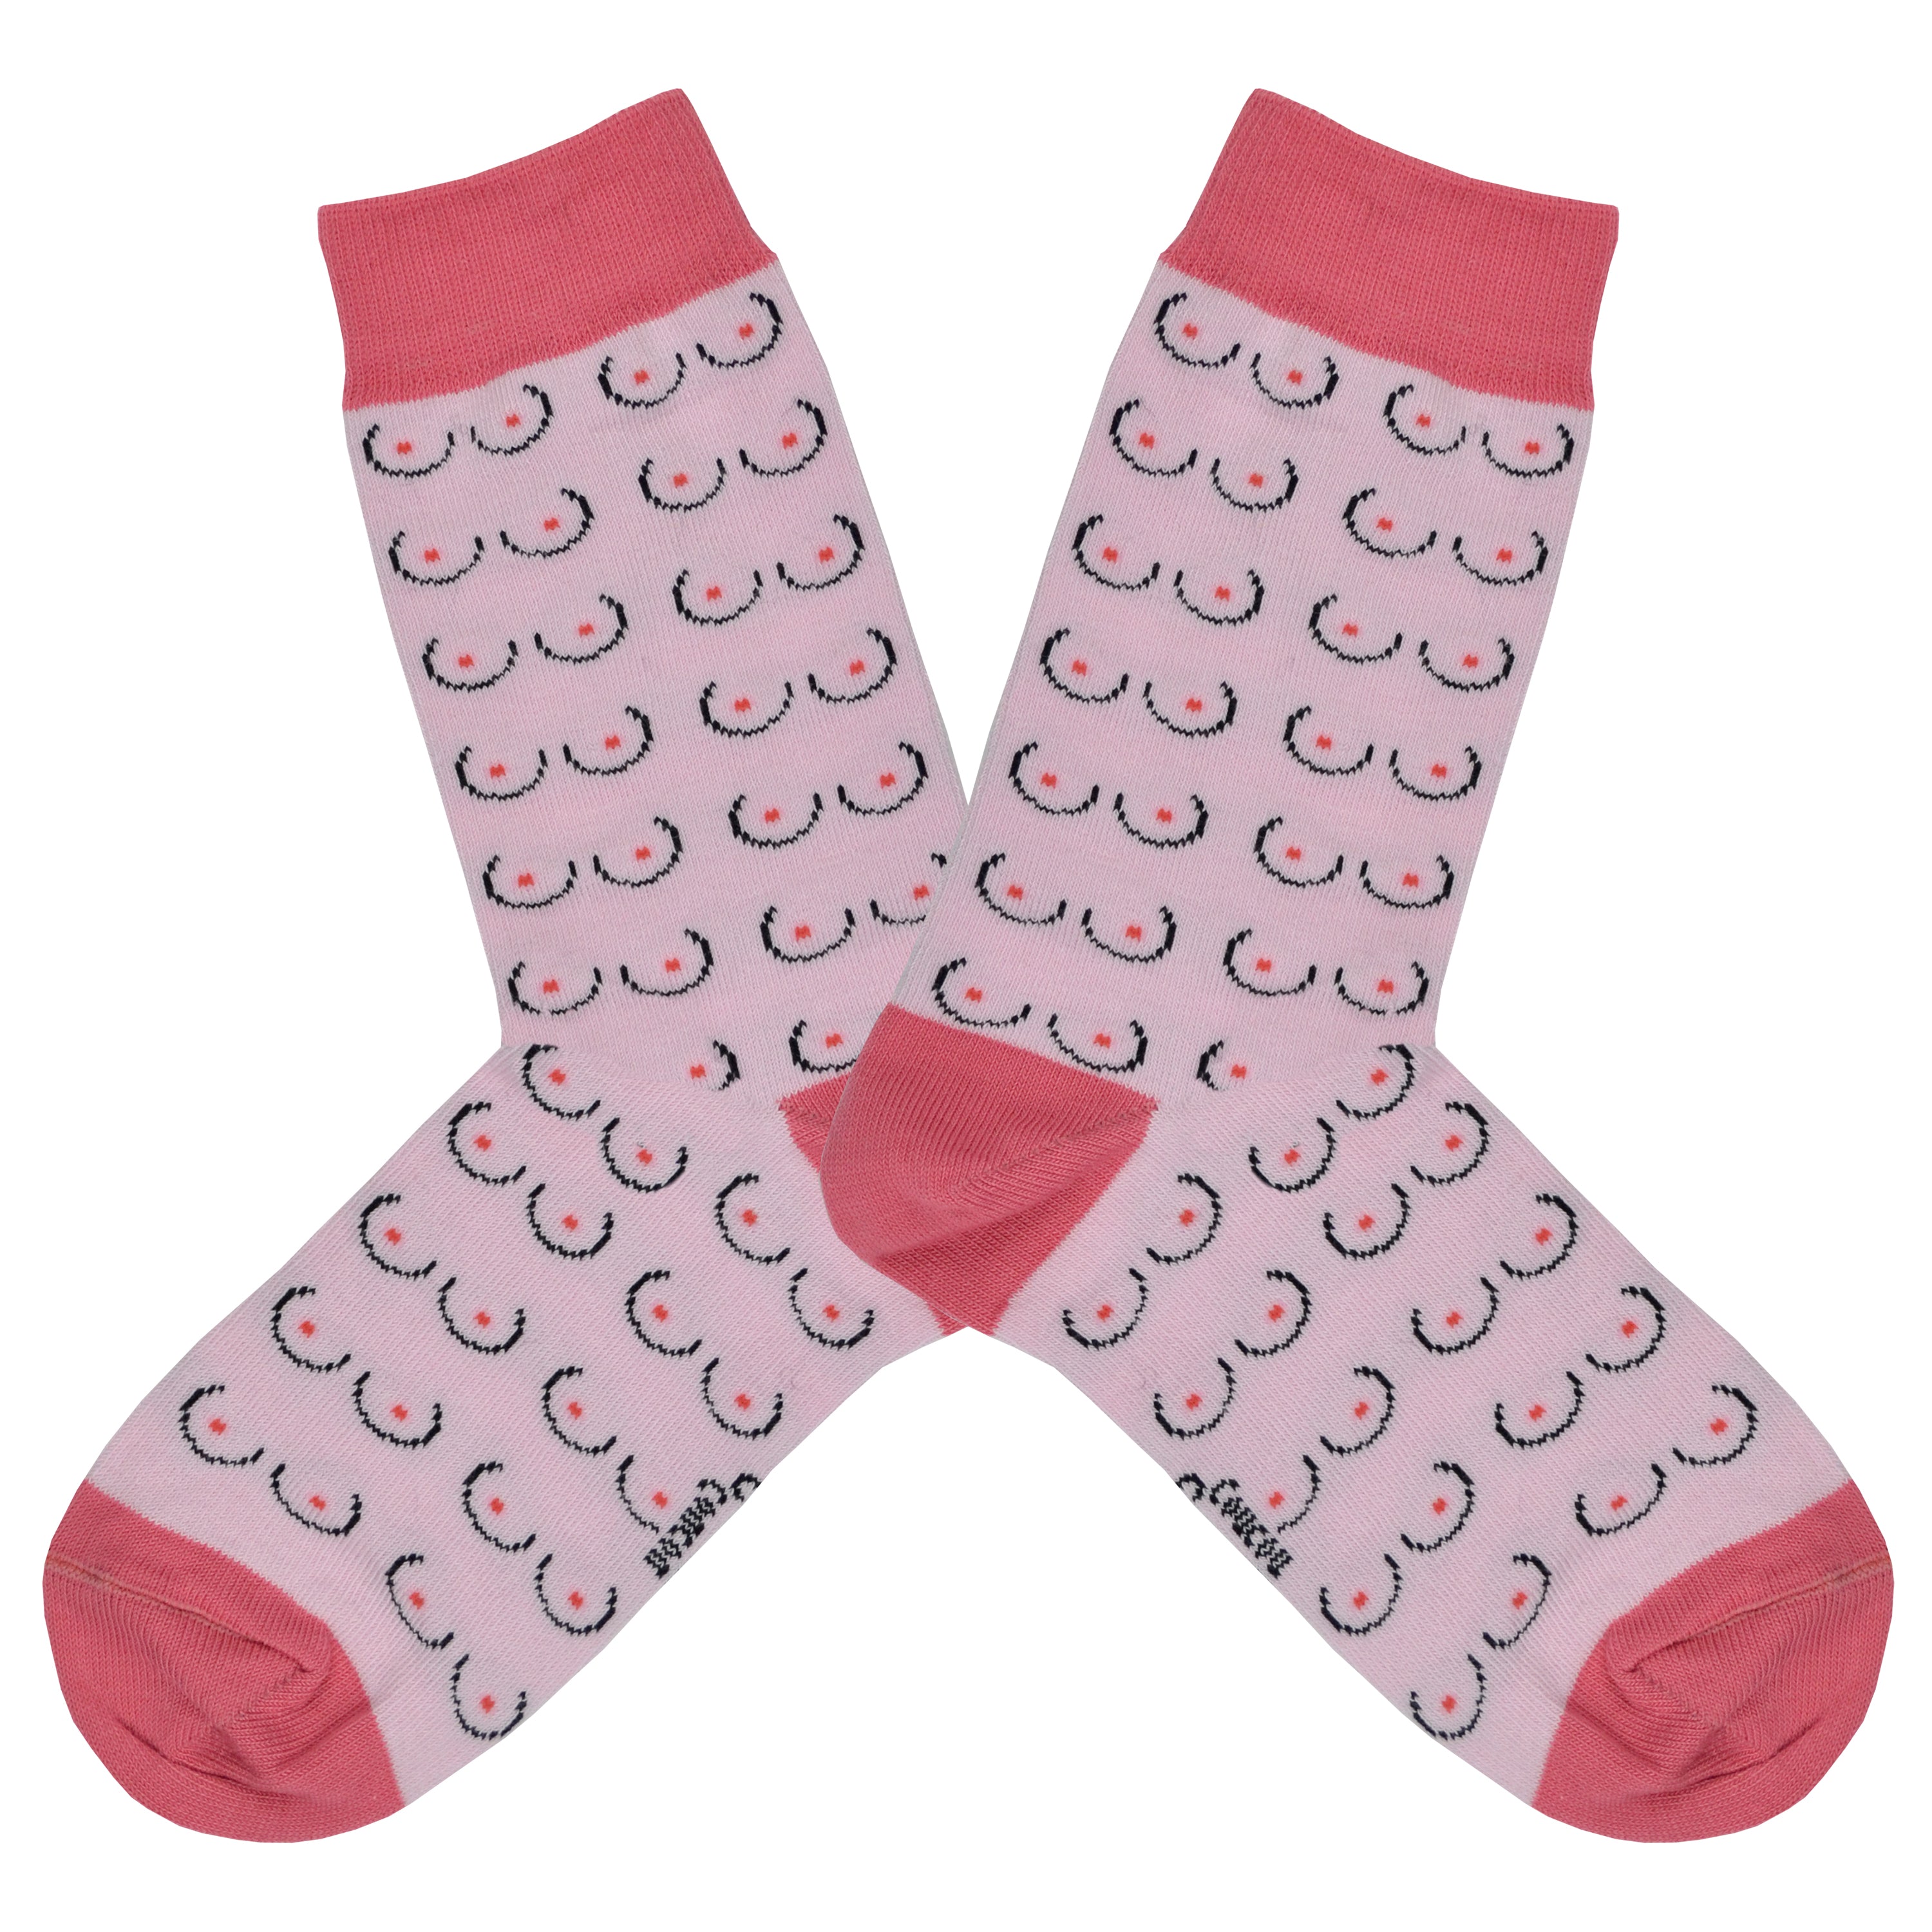 Shown in a flatlay, a pair of Coucou Suzette cotton women’s crew socks with minimalistic boob pattern in light pink skin color